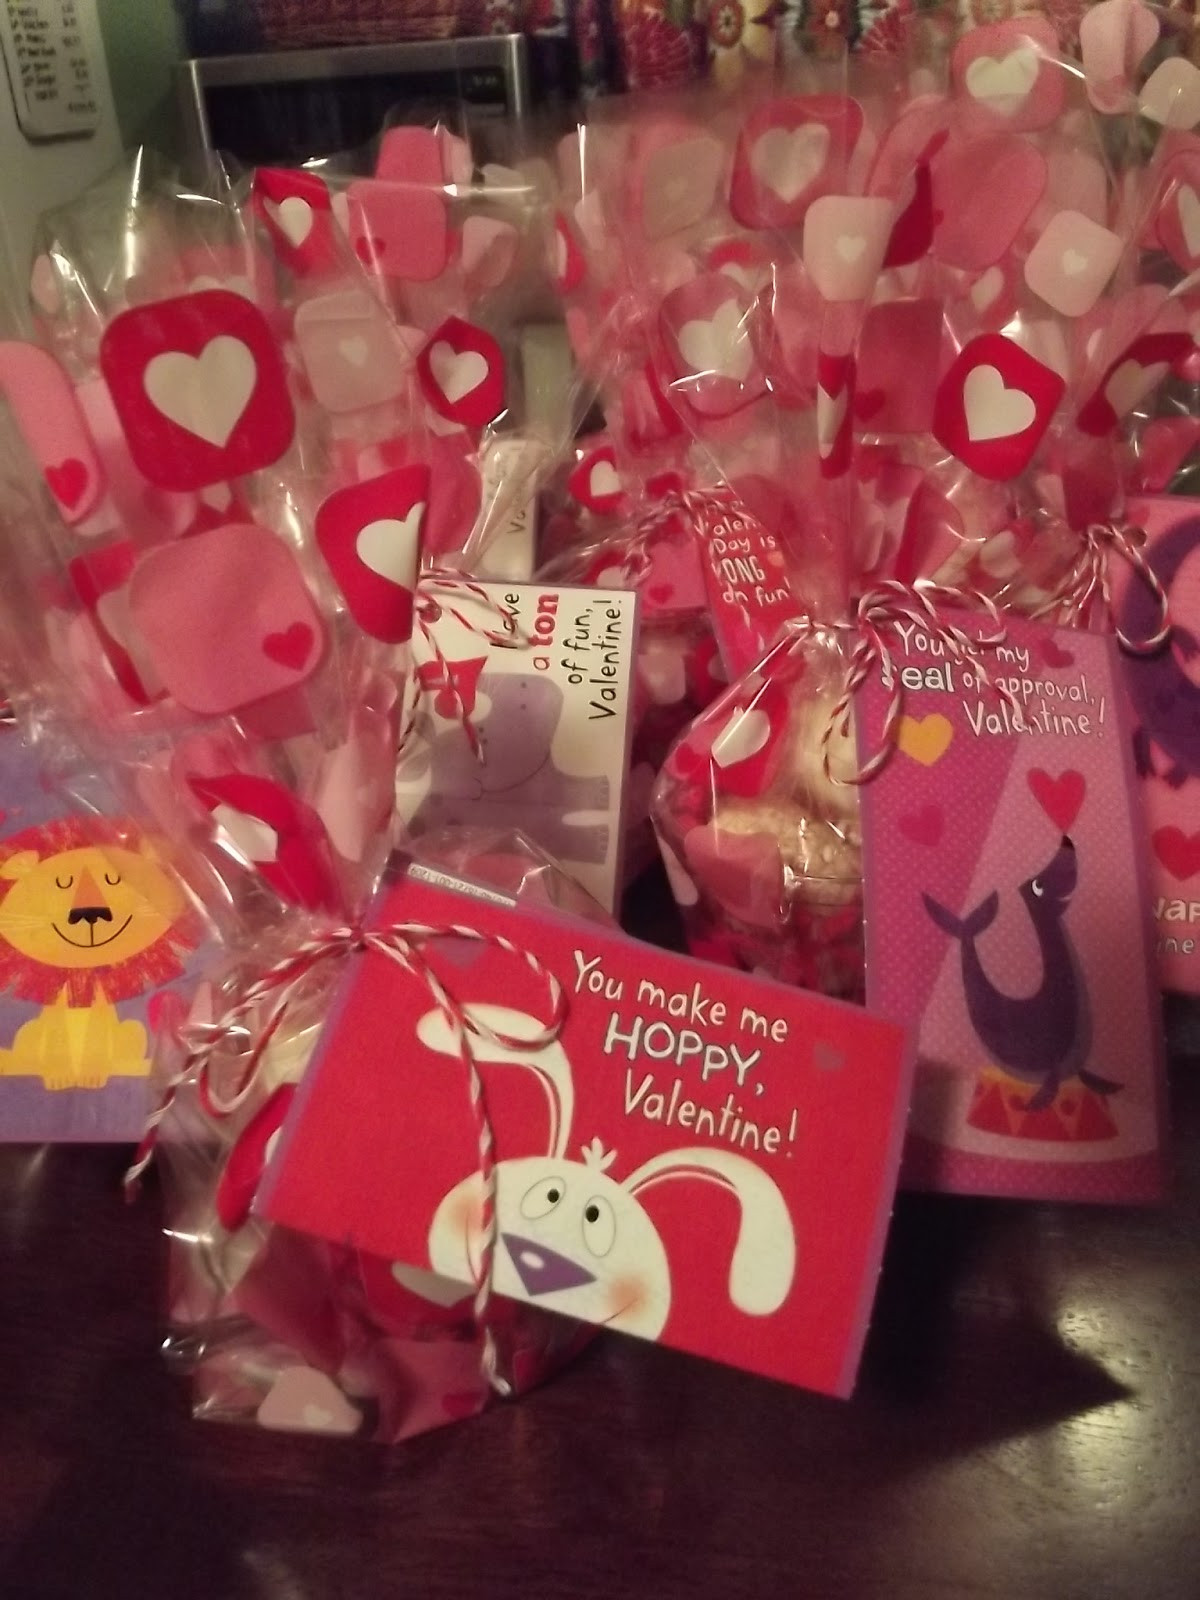 School Valentine Gift Ideas
 Simple and Sweet Pea Valentine Gift Ideas